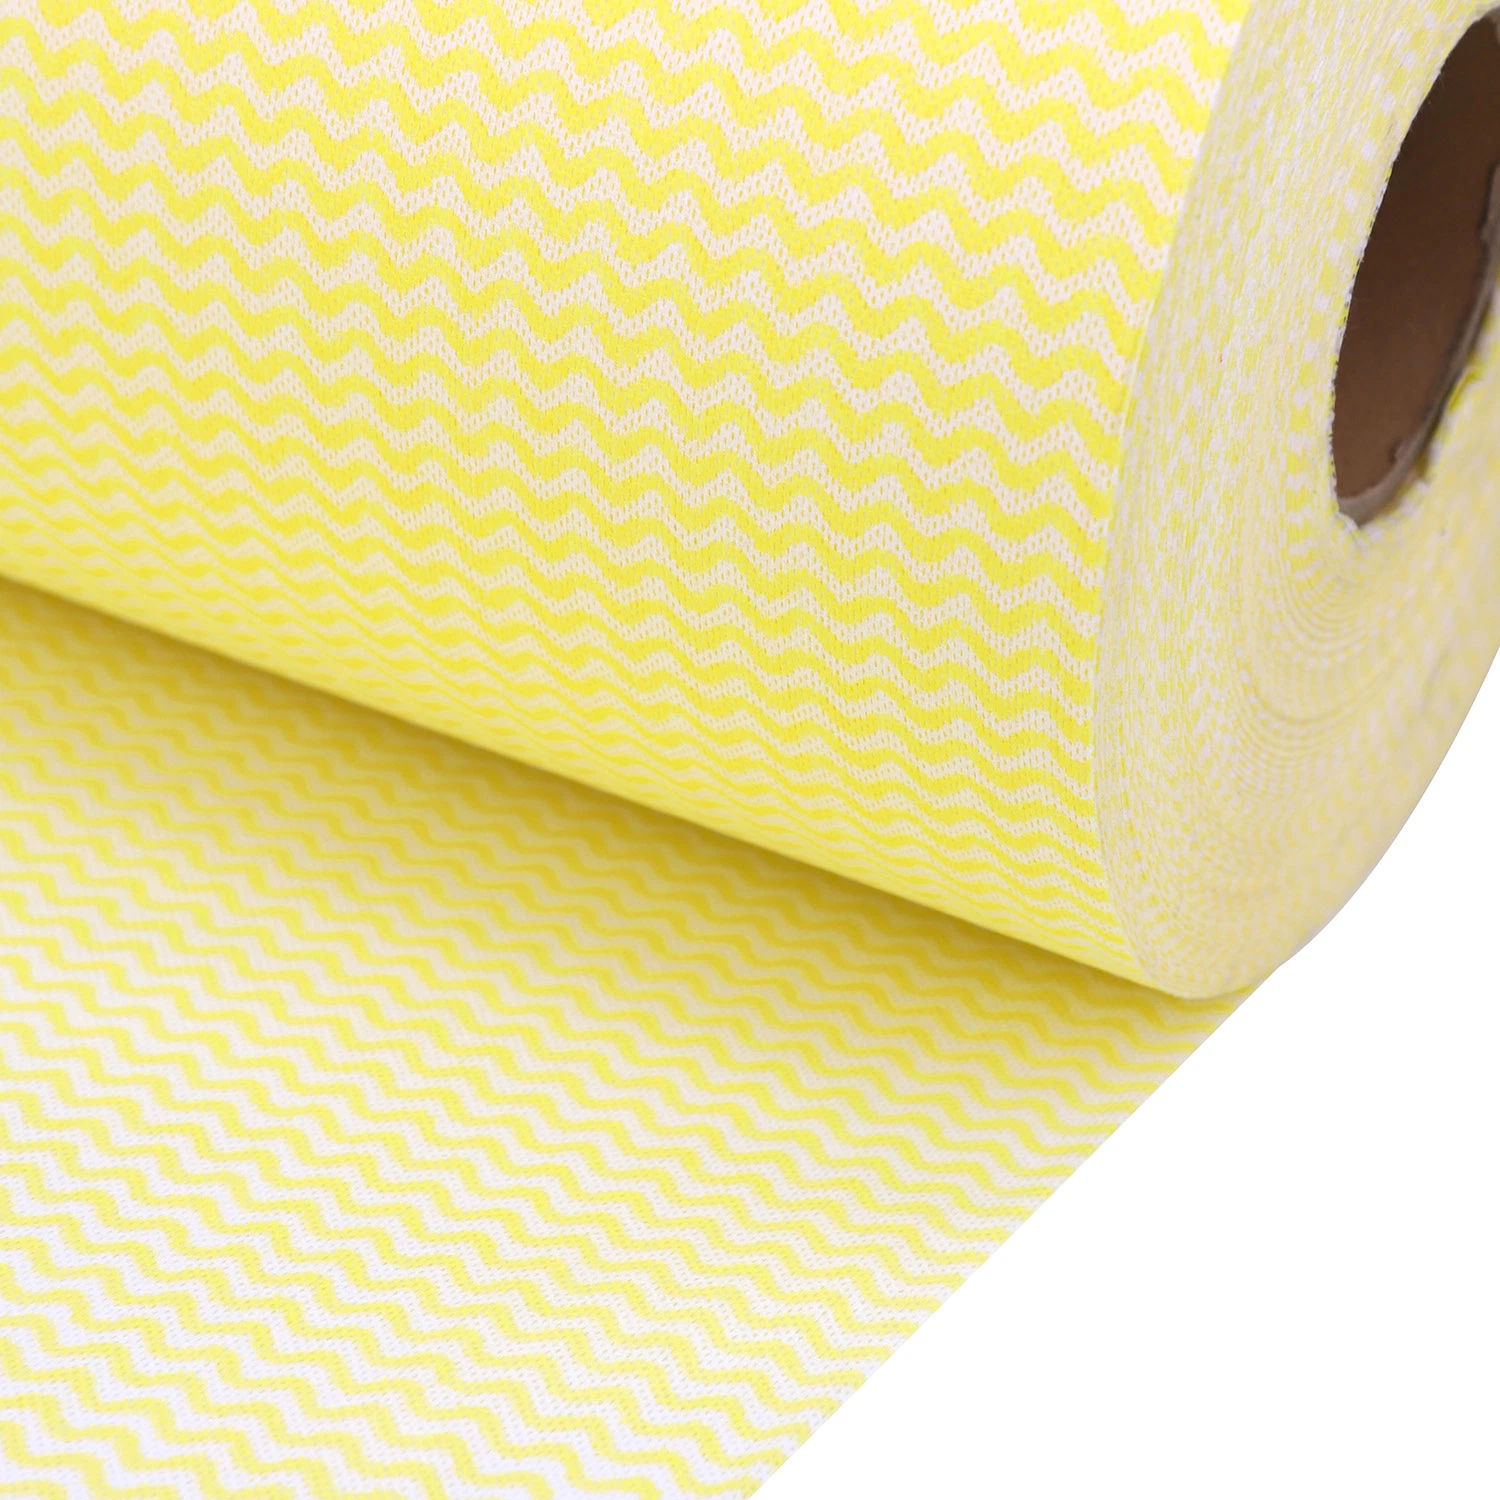 Woodpulp Polyester Laminateds Spunlace Nonwoven Fabric, Wave Line Materials for Kitchen Cleaning, Household Cleaning, Civil Wiper